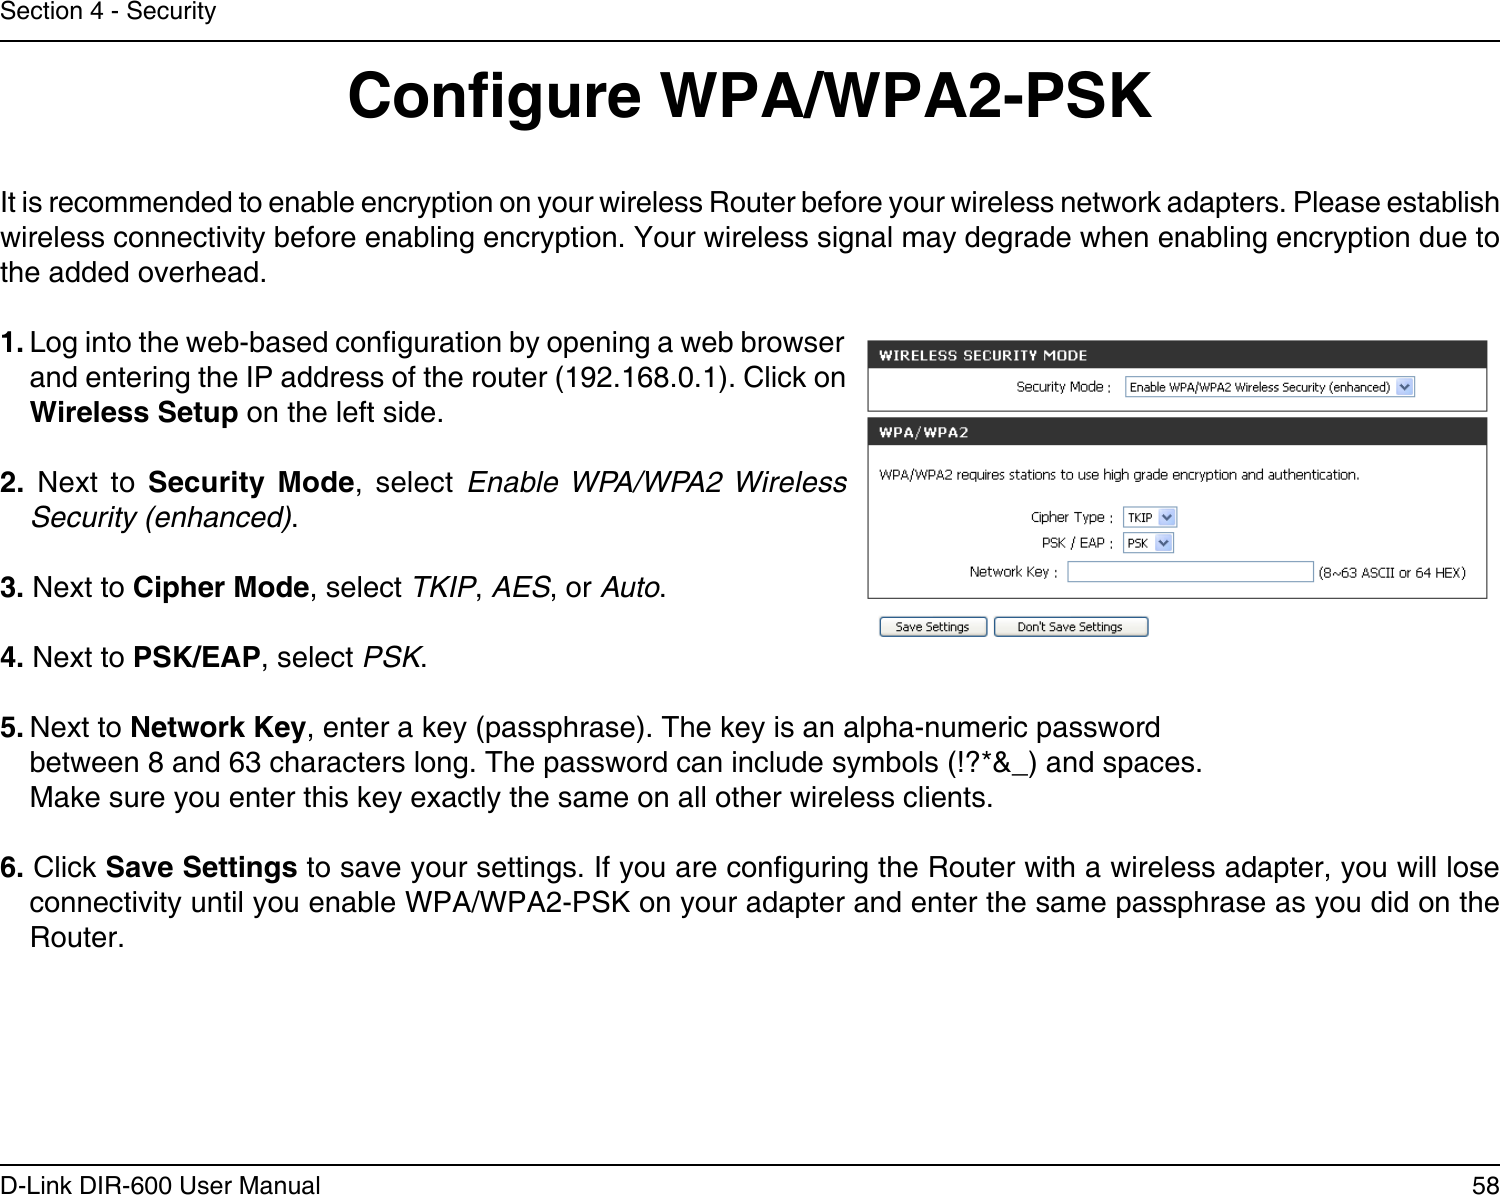 58D-Link DIR-600 User ManualSection 4 - SecurityCongure WPA/WPA2-PSKIt is recommended to enable encryption on your wireless Router before your wireless network adapters. Please establish wireless connectivity before enabling encryption. Your wireless signal may degrade when enabling encryption due to the added overhead.1. Log into the web-based conguration by opening a web browser and entering the IP address of the router (192.168.0.1). Click on Wireless Setup on the left side.2.  Next  to  Security  Mode,  select  Enable WPA/WPA2 Wireless Security (enhanced).3. Next to Cipher Mode, select TKIP, AES, or Auto.4. Next to PSK/EAP, select PSK.5. Next to Network Key, enter a key (passphrase). The key is an alpha-numeric password between 8 and 63 characters long. The password can include symbols (!?*&amp;_) and spaces. Make sure you enter this key exactly the same on all other wireless clients.6. Click Save Settings to save your settings. If you are conguring the Router with a wireless adapter, you will lose connectivity until you enable WPA/WPA2-PSK on your adapter and enter the same passphrase as you did on the Router.